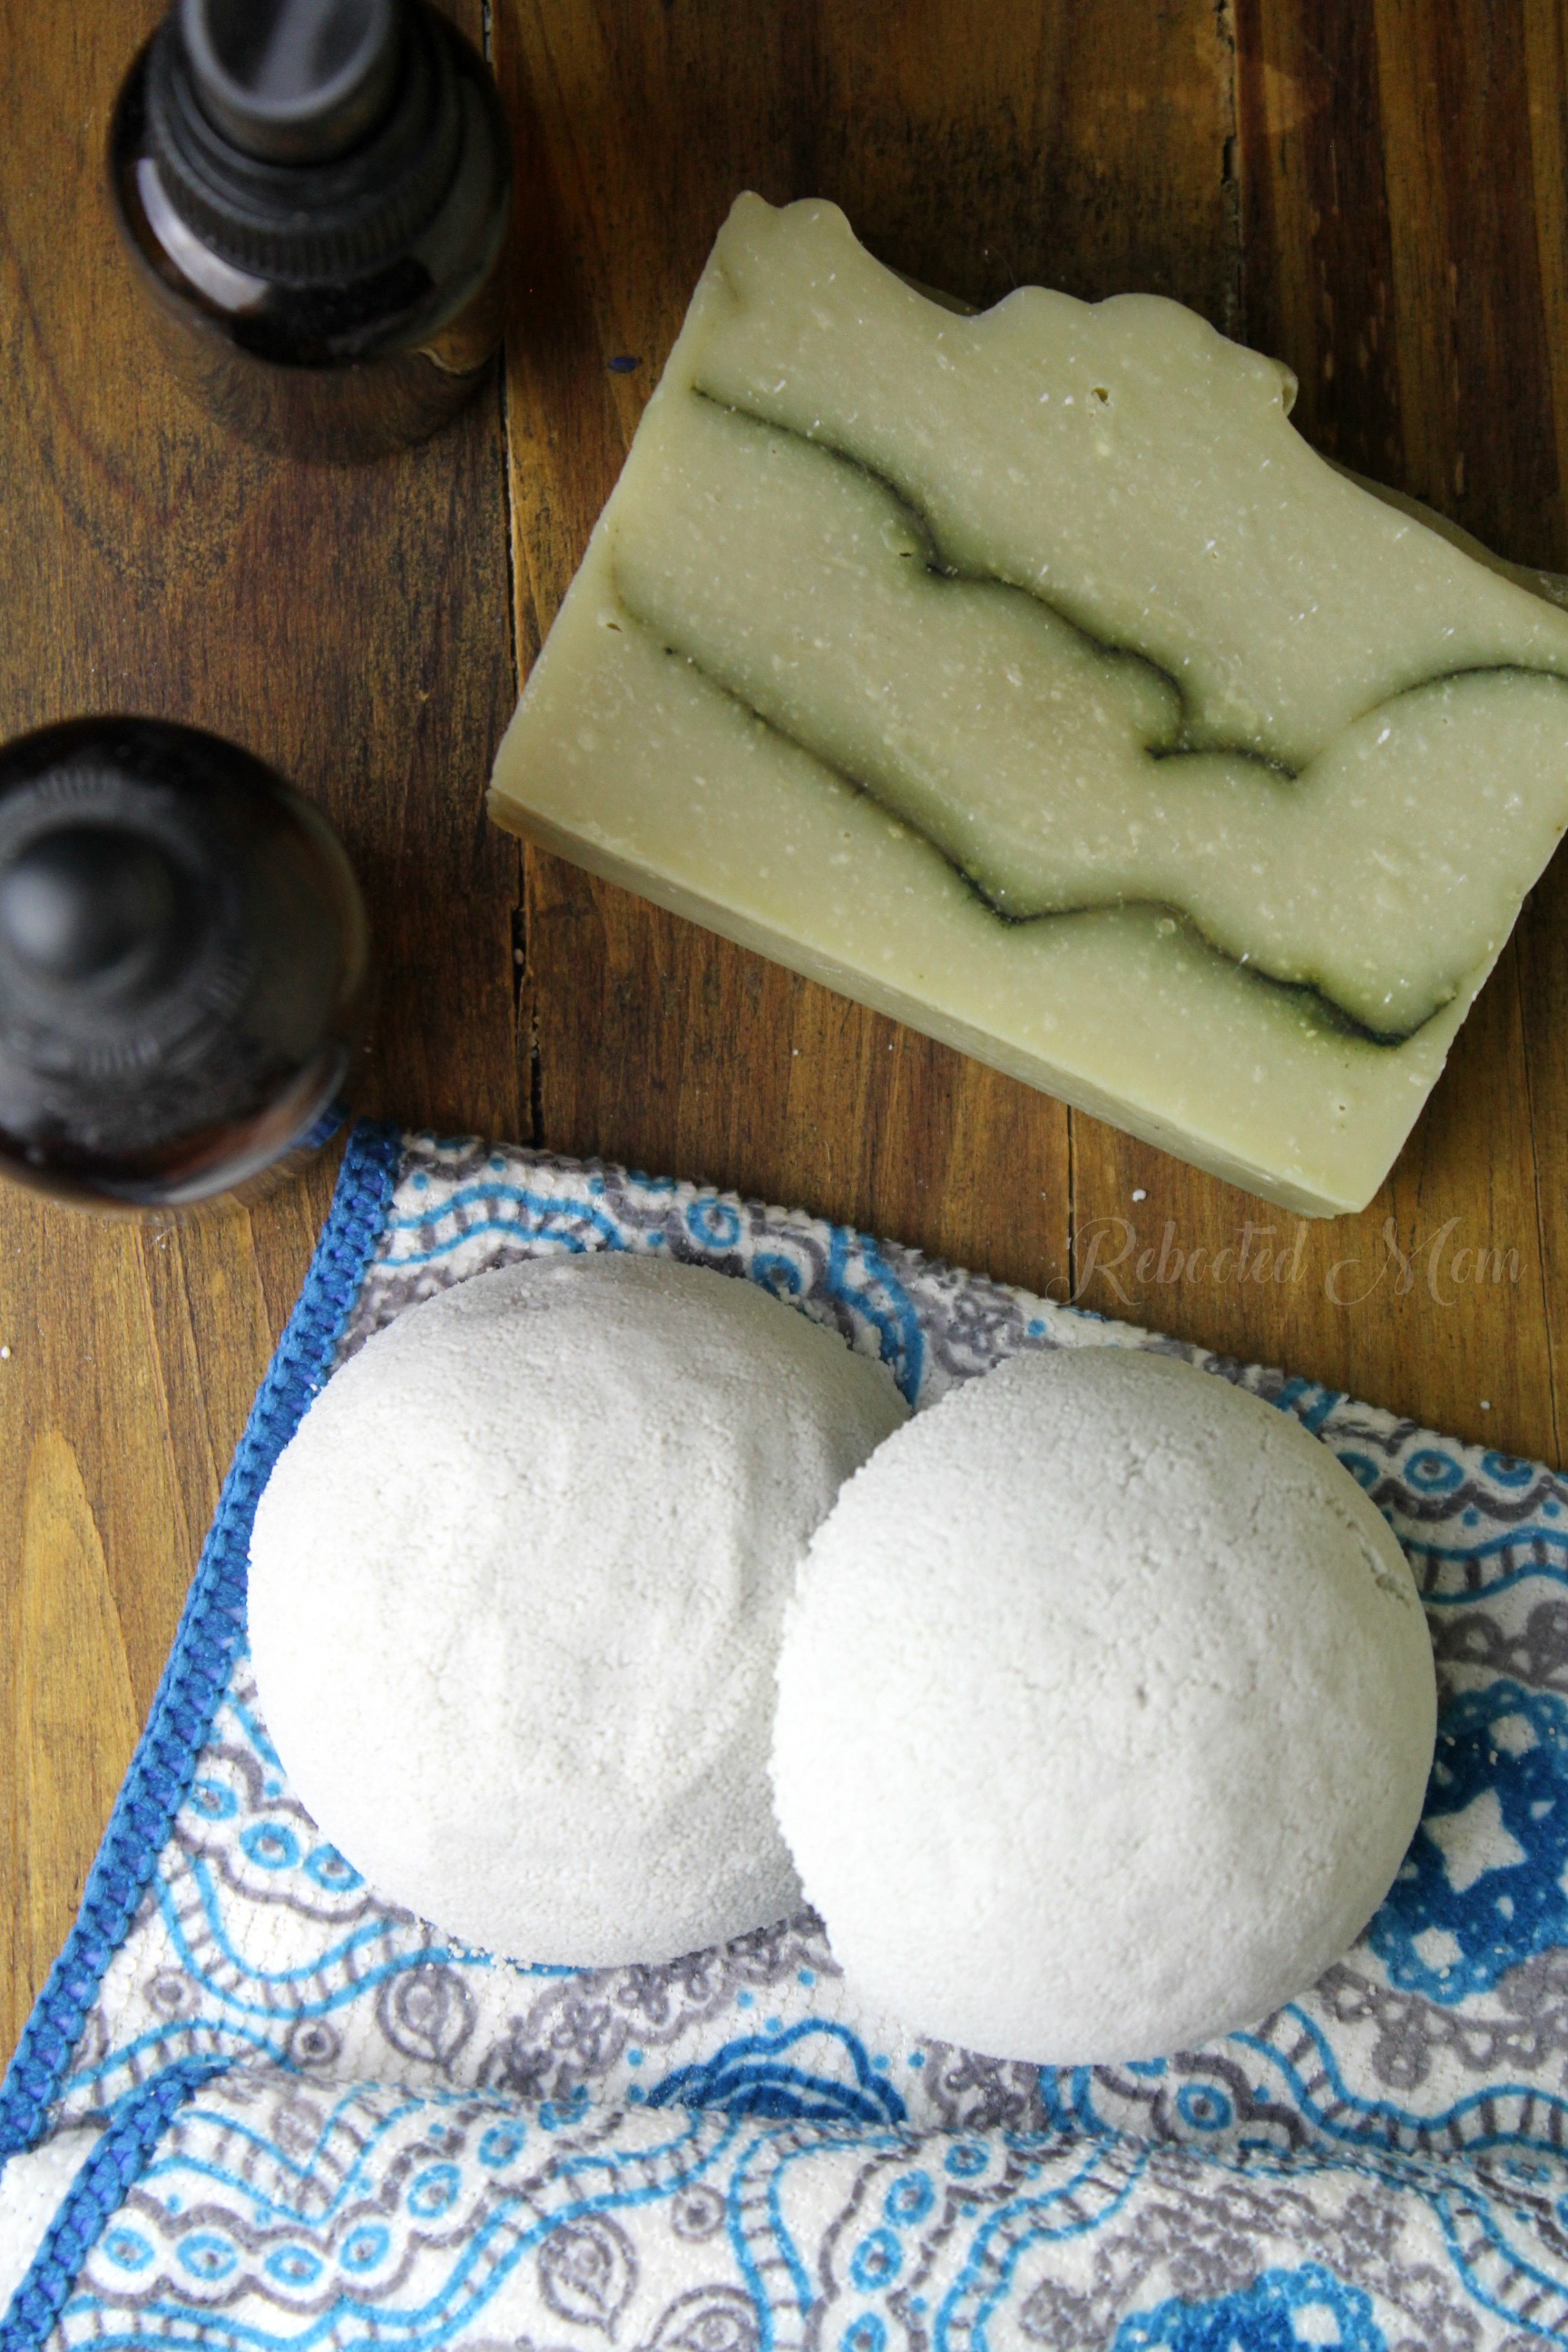 Learn how to make these simple DIY aromatherapy shower steamers with simple ingredients, scented with your favorite combination of essential oils!